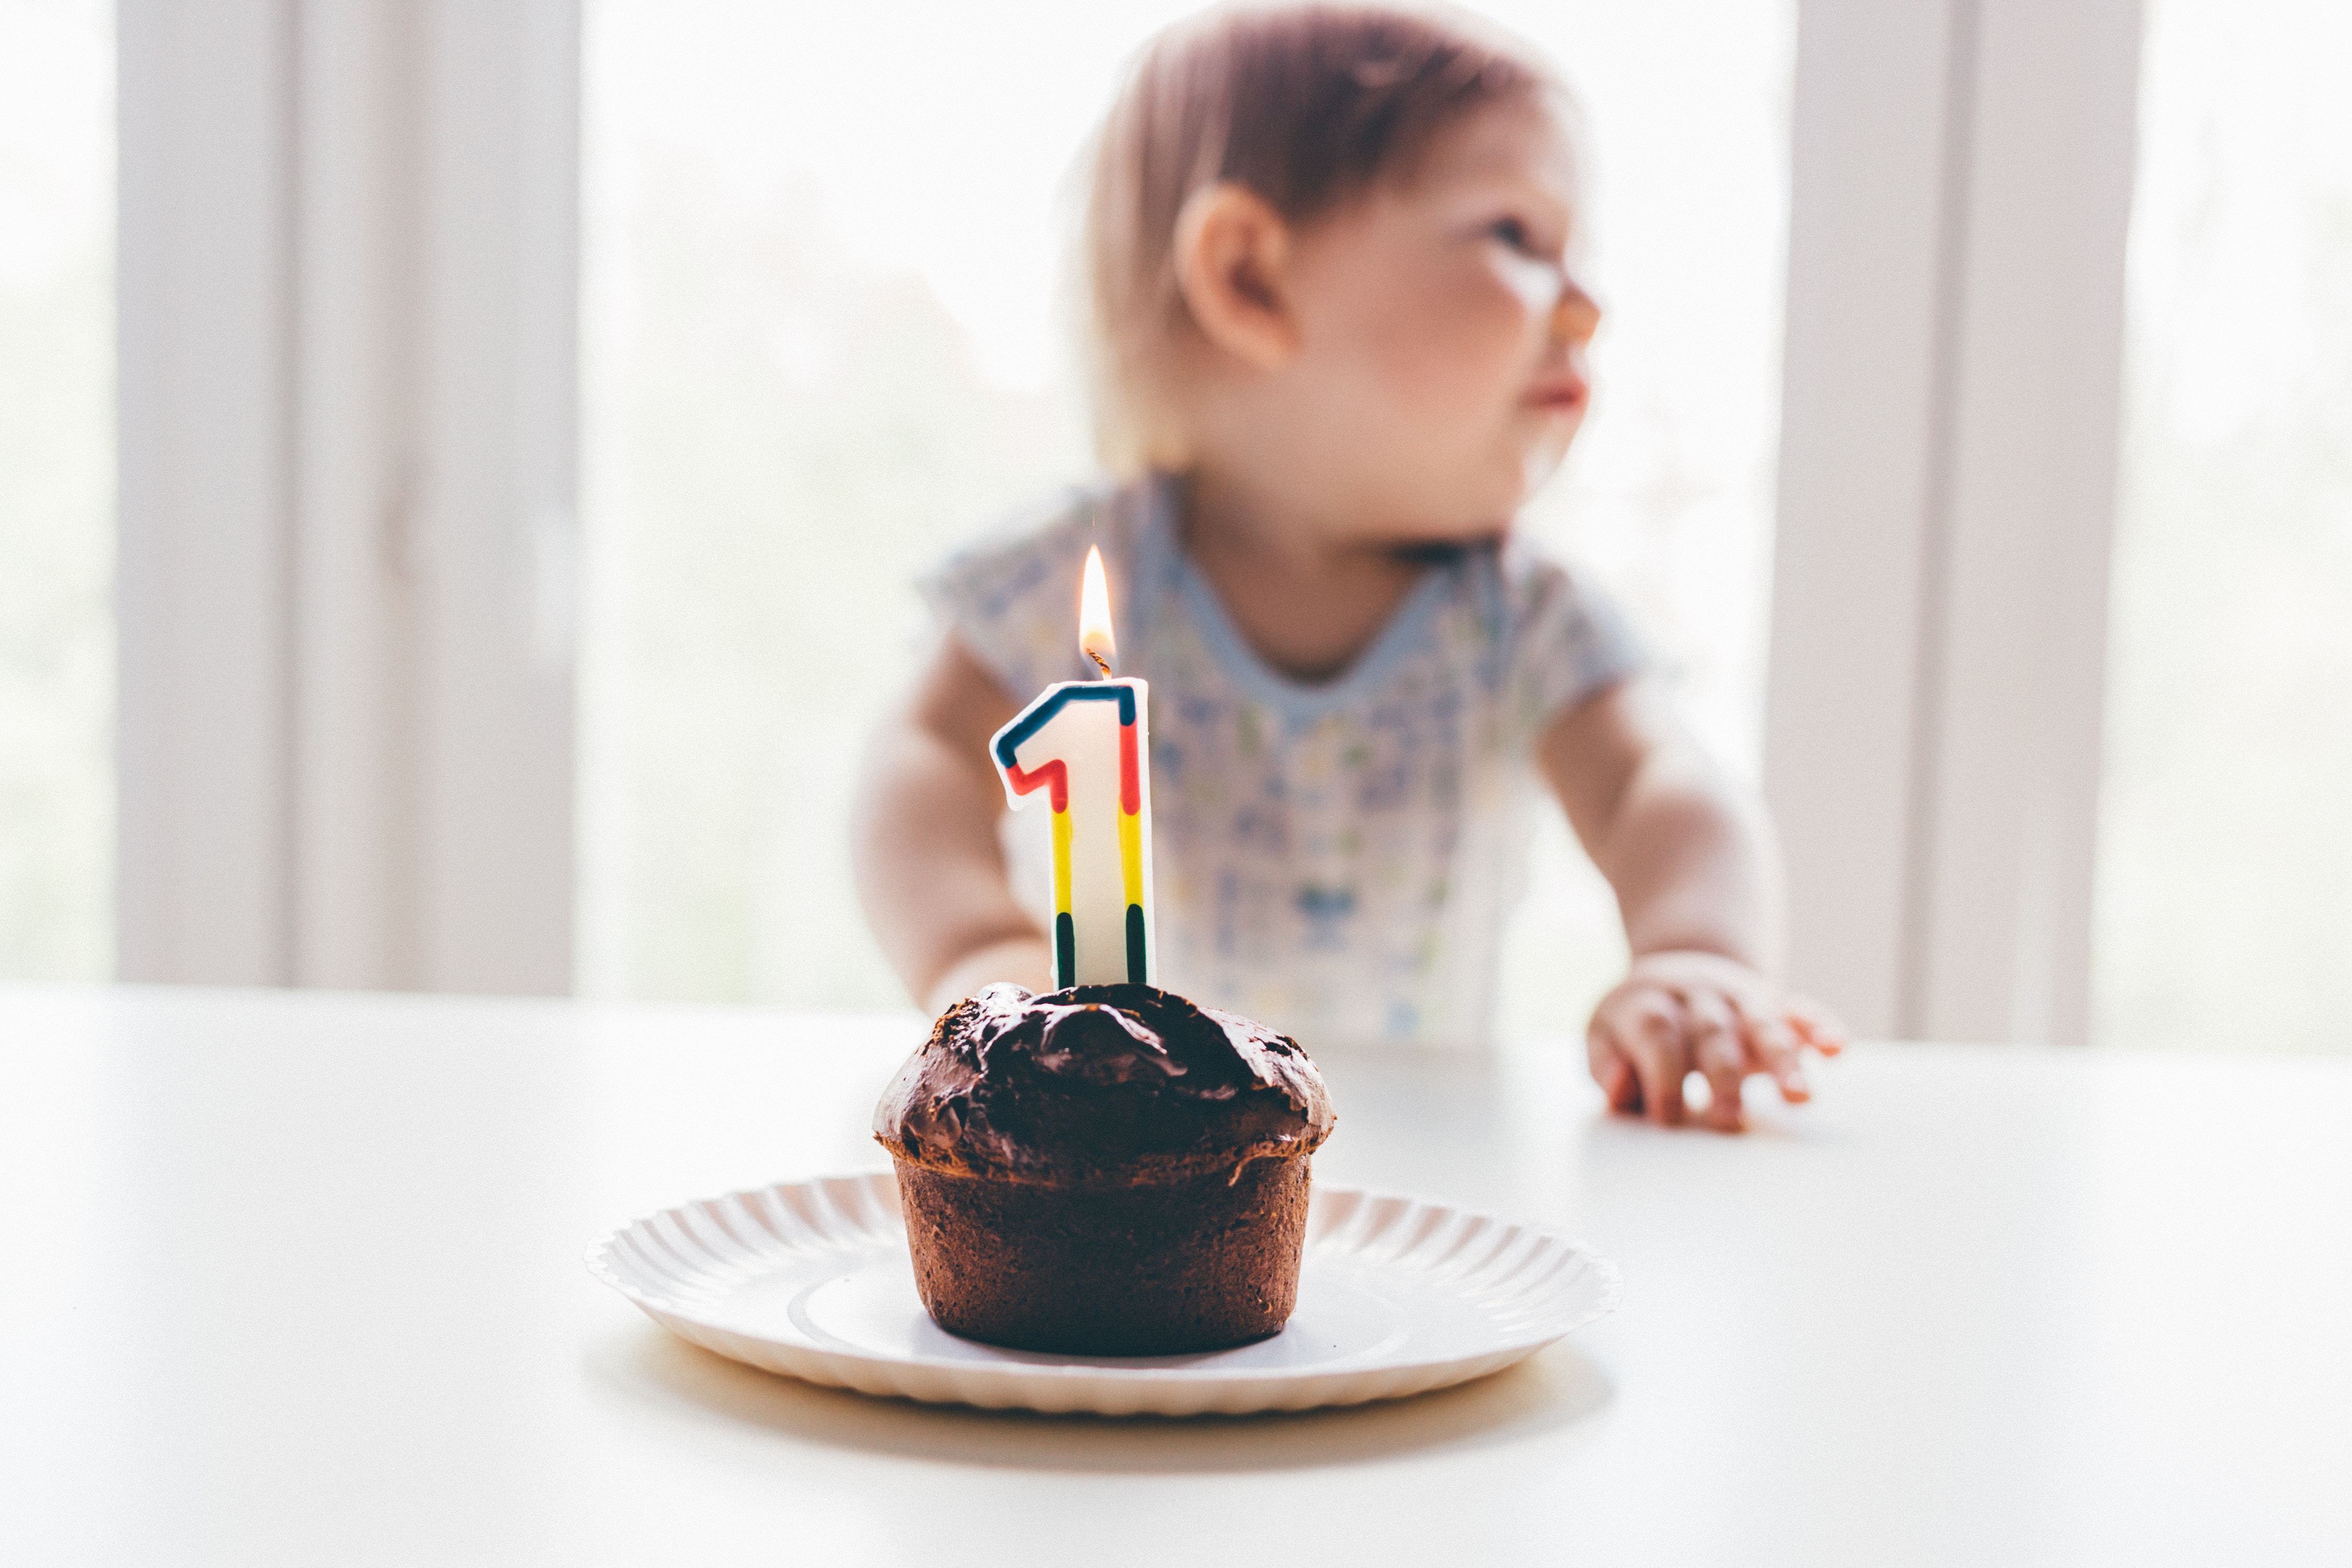 Top 5 Delicious Cakes for your lovely kids